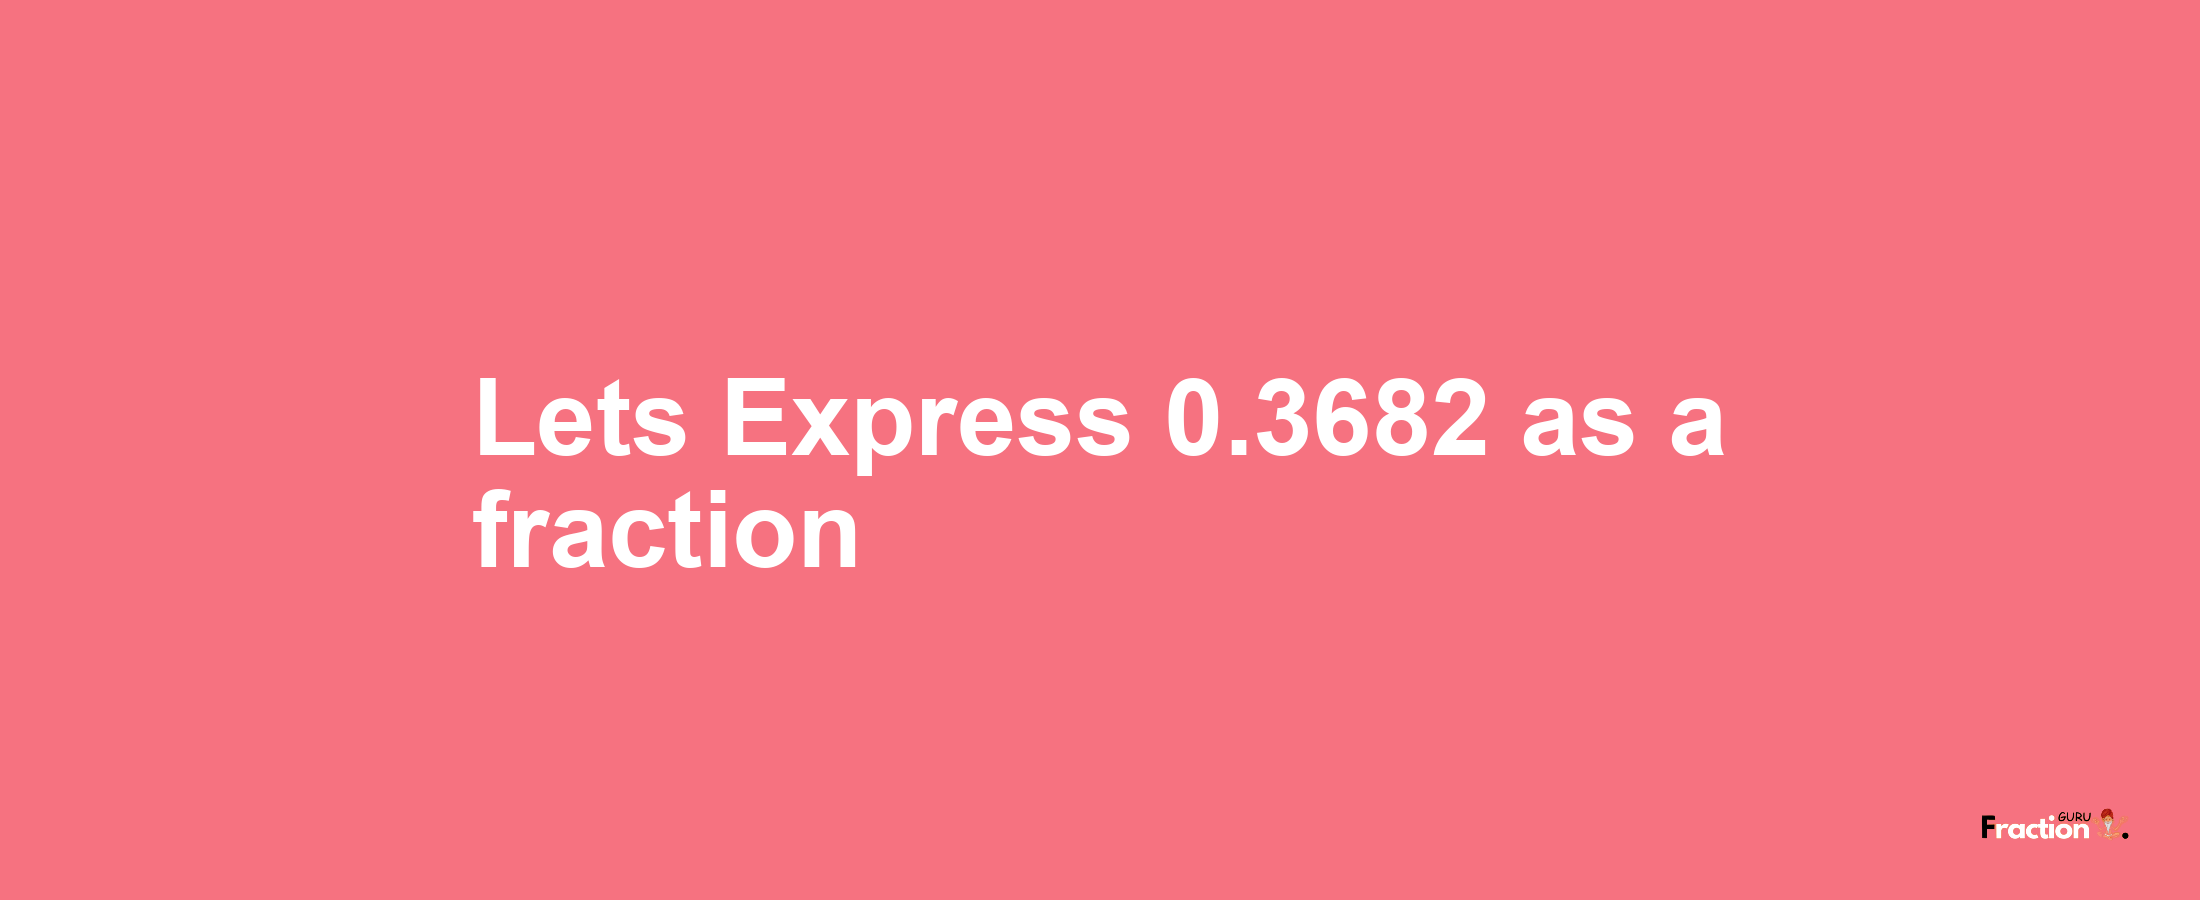 Lets Express 0.3682 as afraction